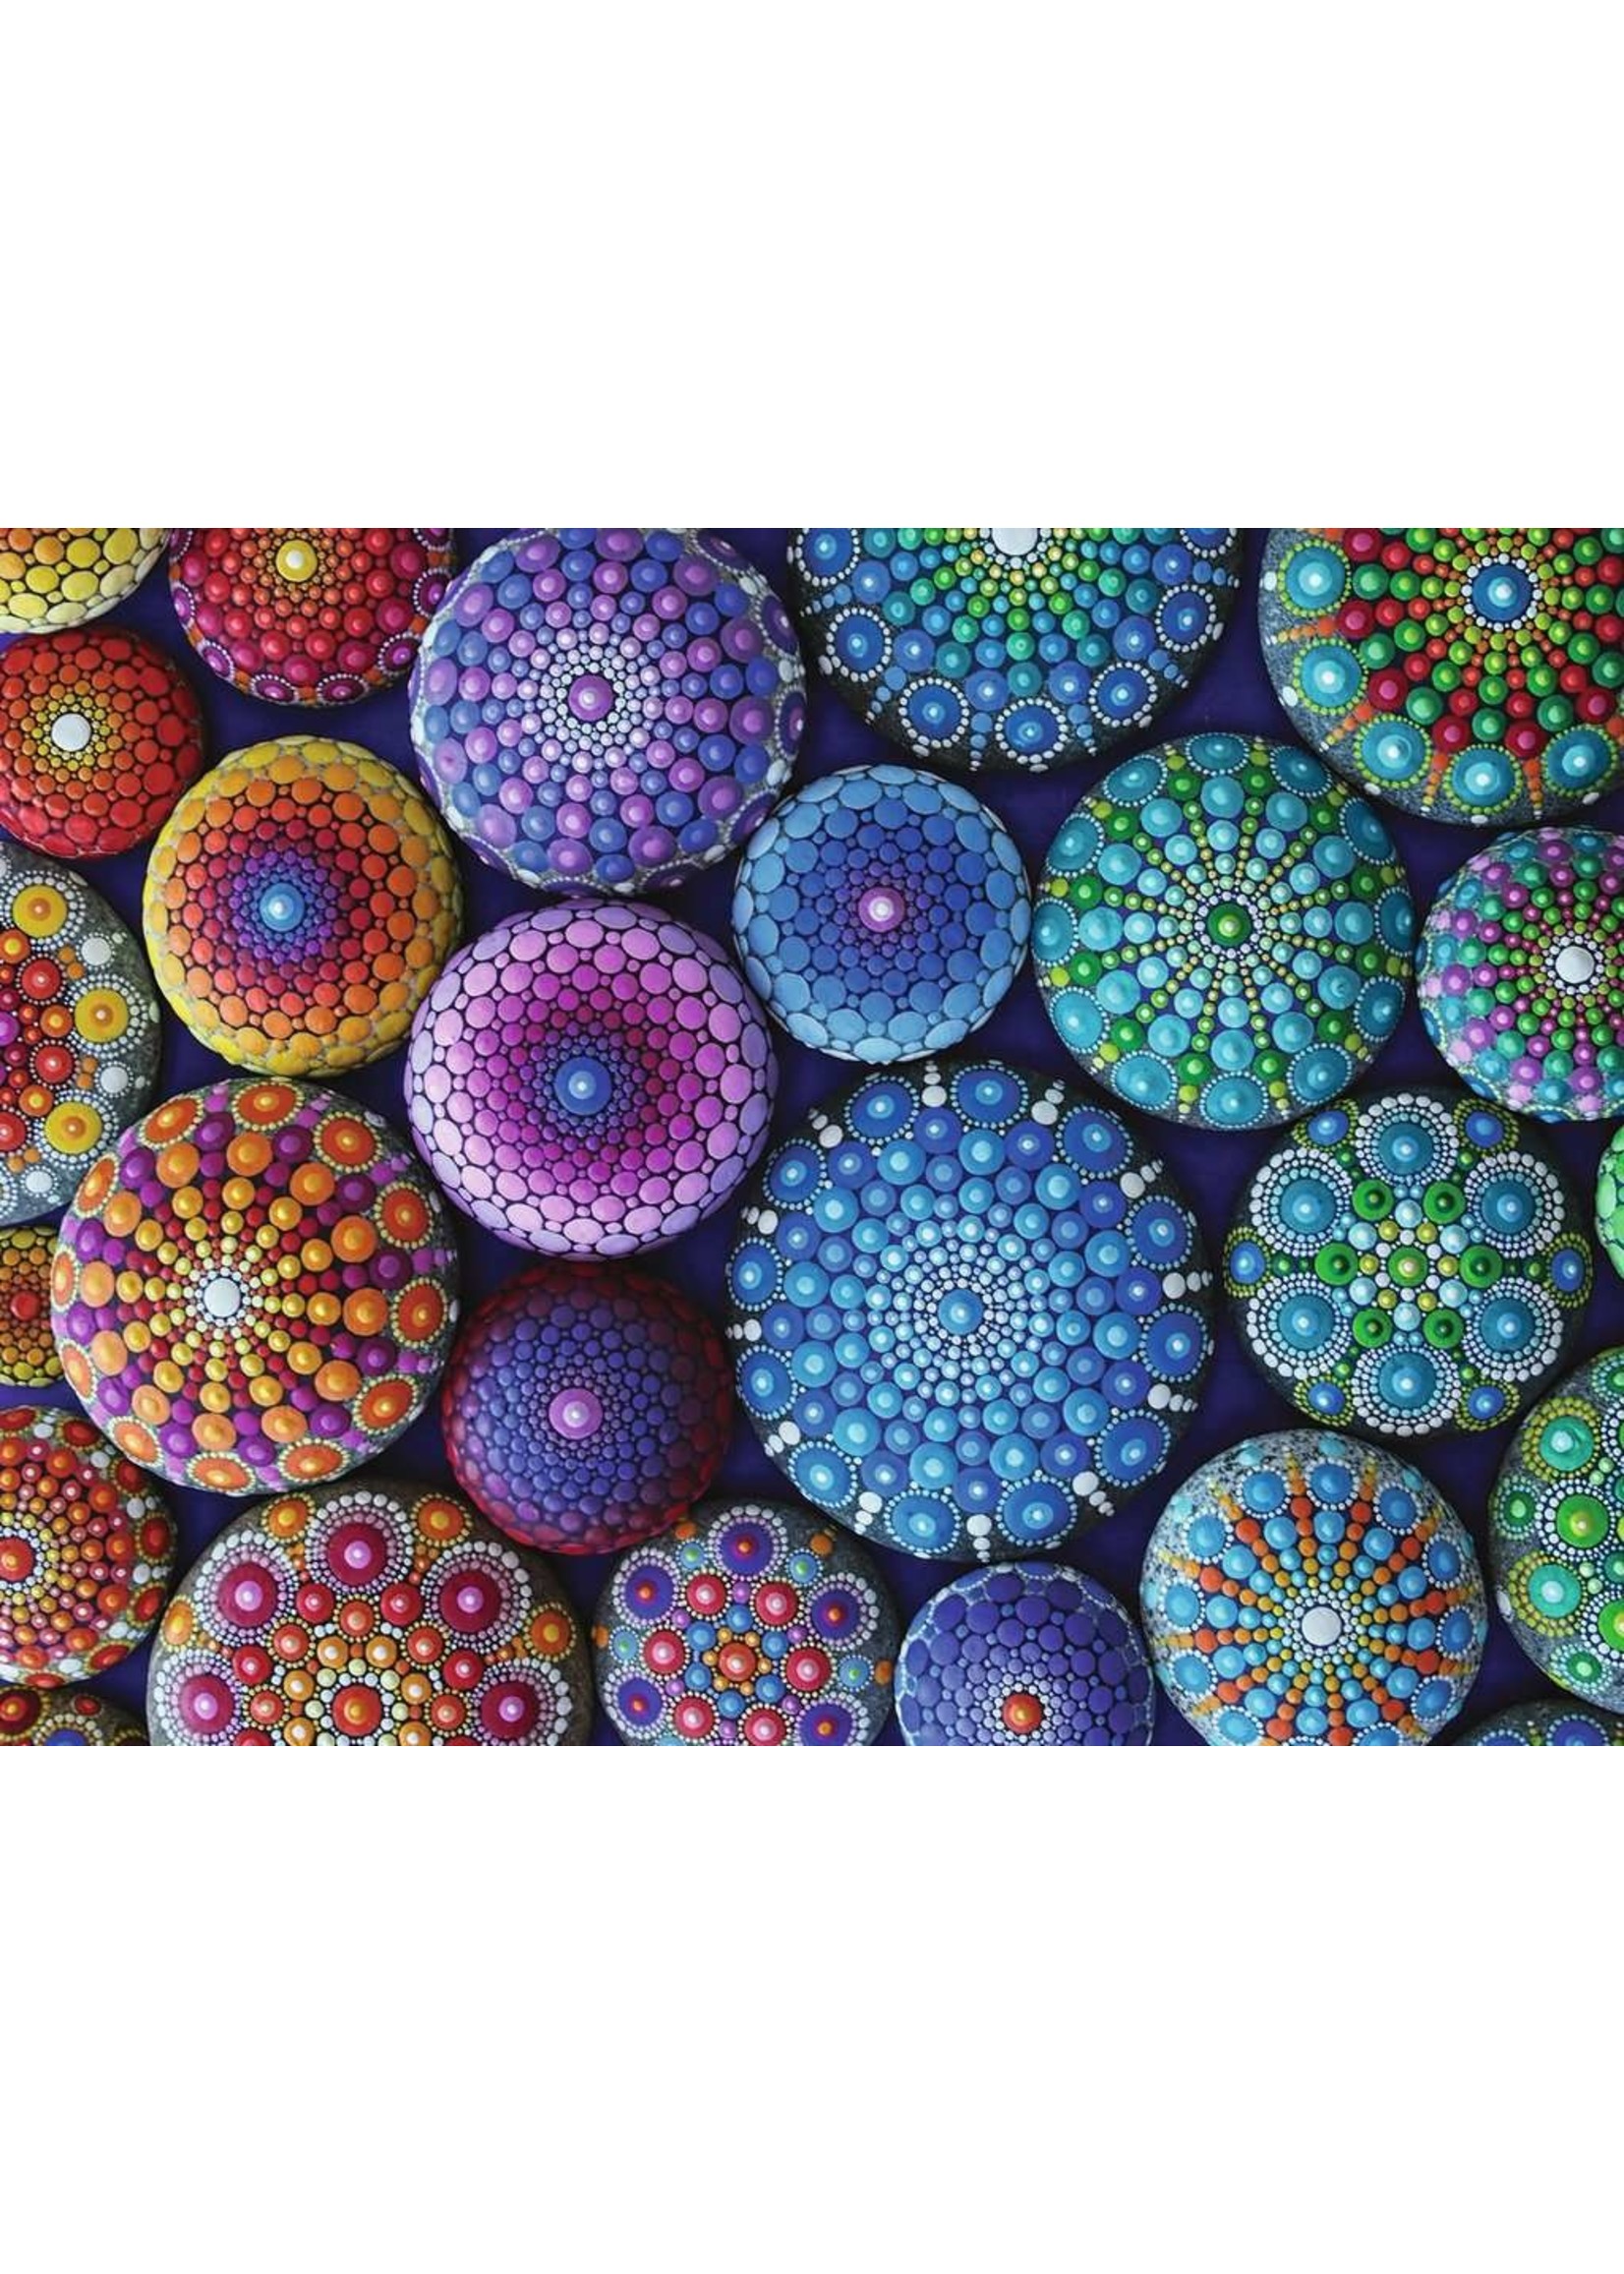 Ravensburger One Dot at a Time - 1500 Piece Puzzle